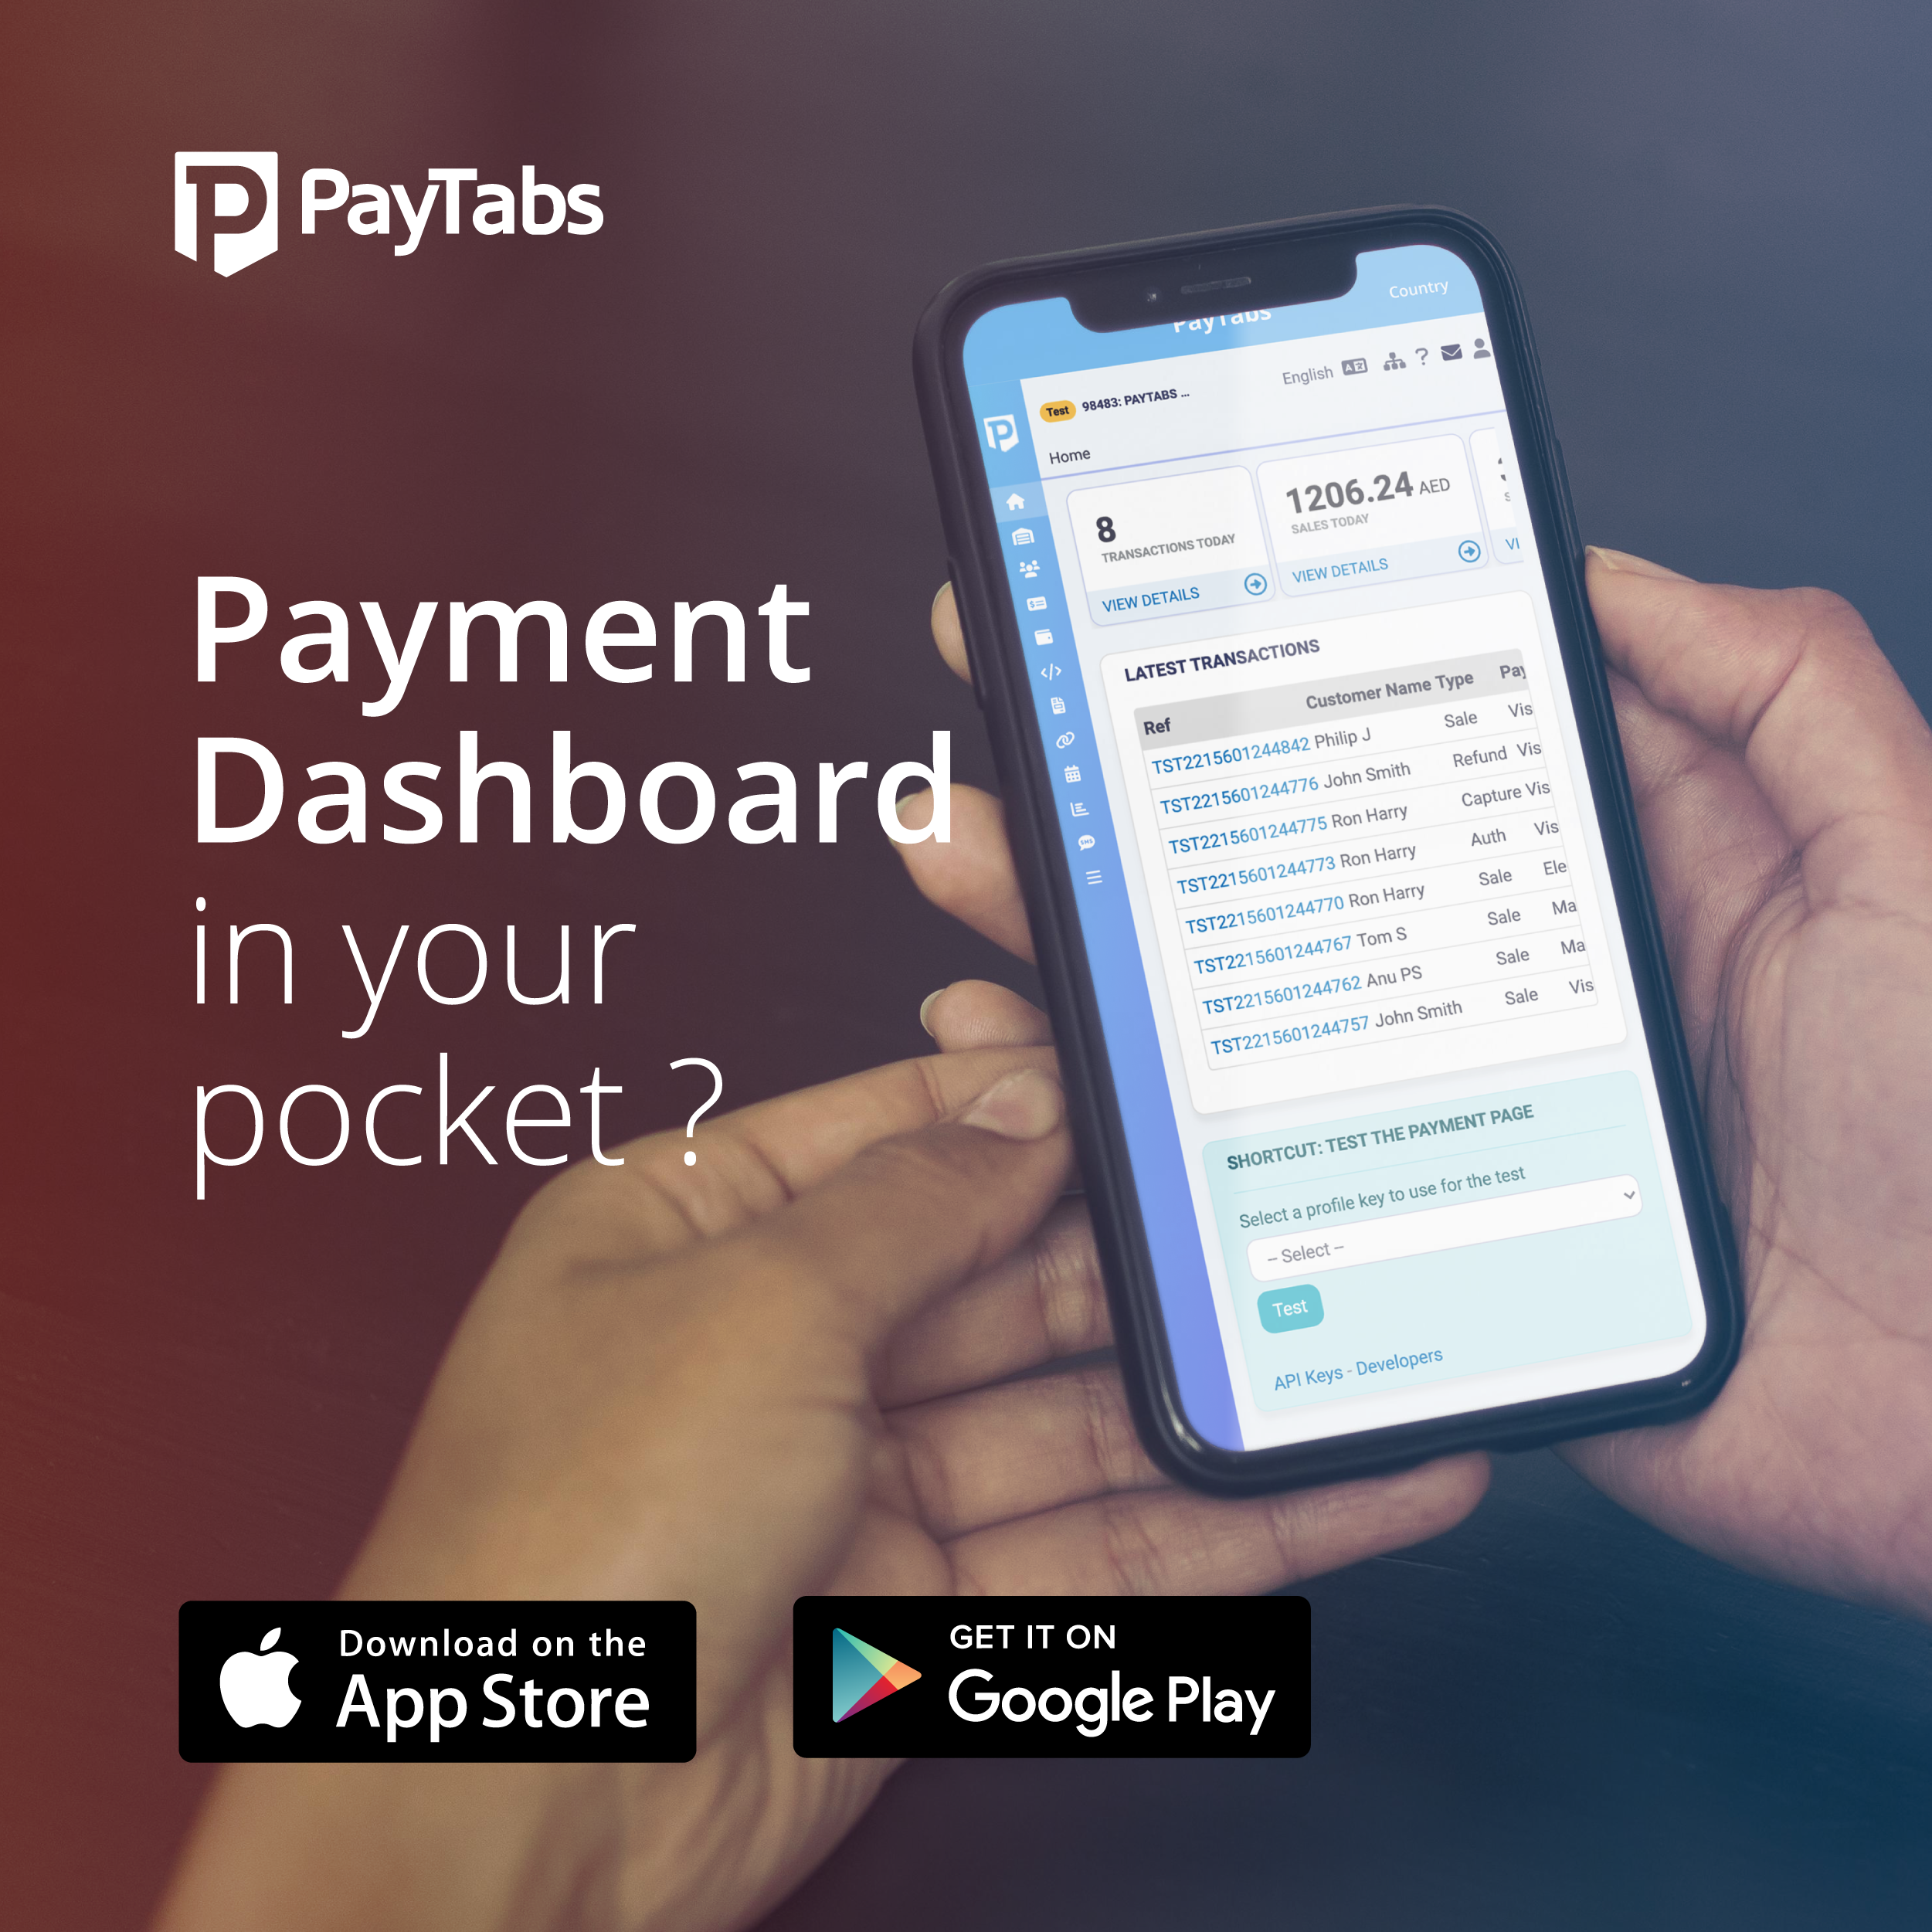 Payment Dashboard in your pocket